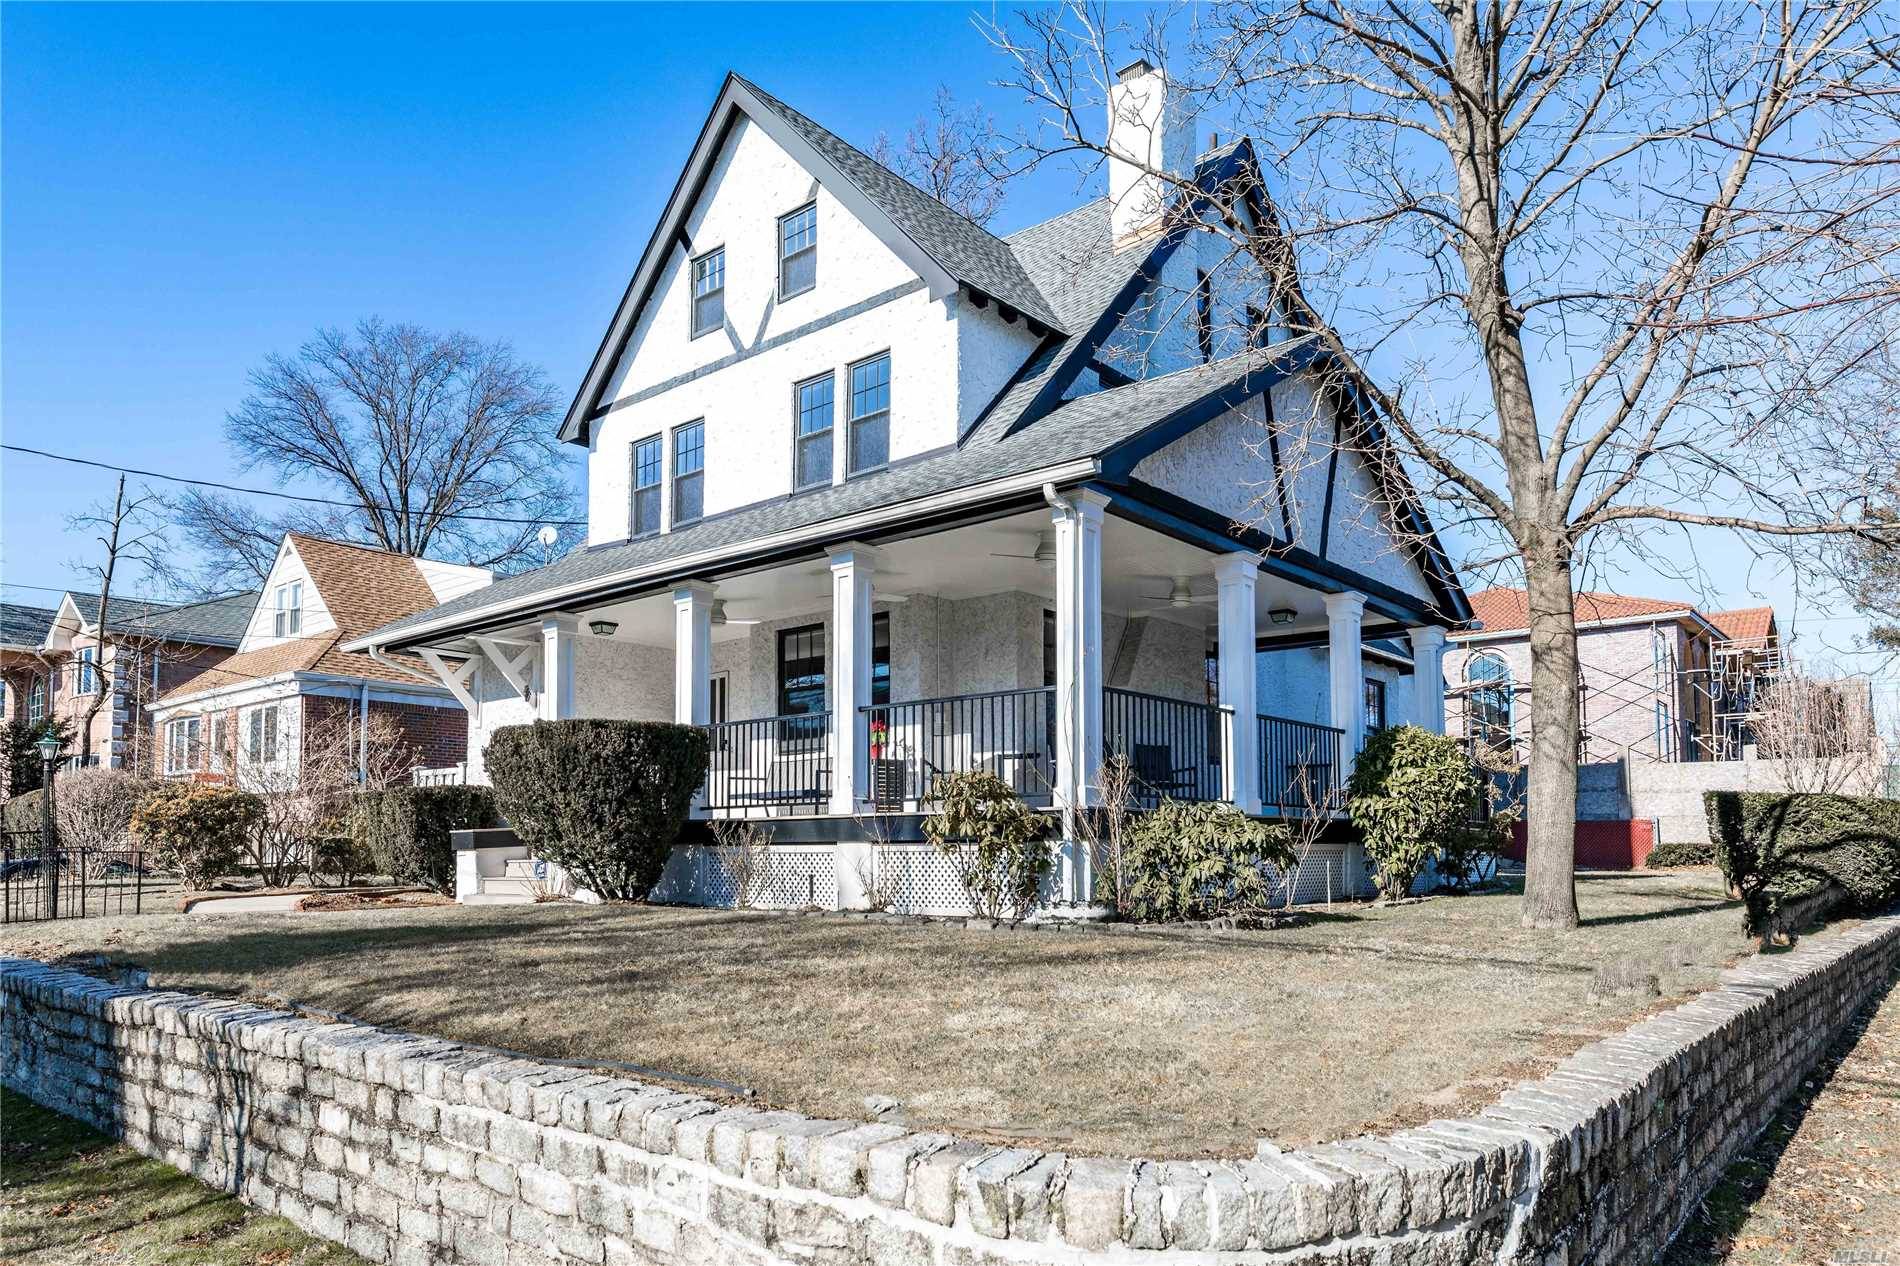 Don't Miss This Beautiful True 6 Bedroom Victorian In Excellent Condition Lots Of Recent Renovations And Upgrades !